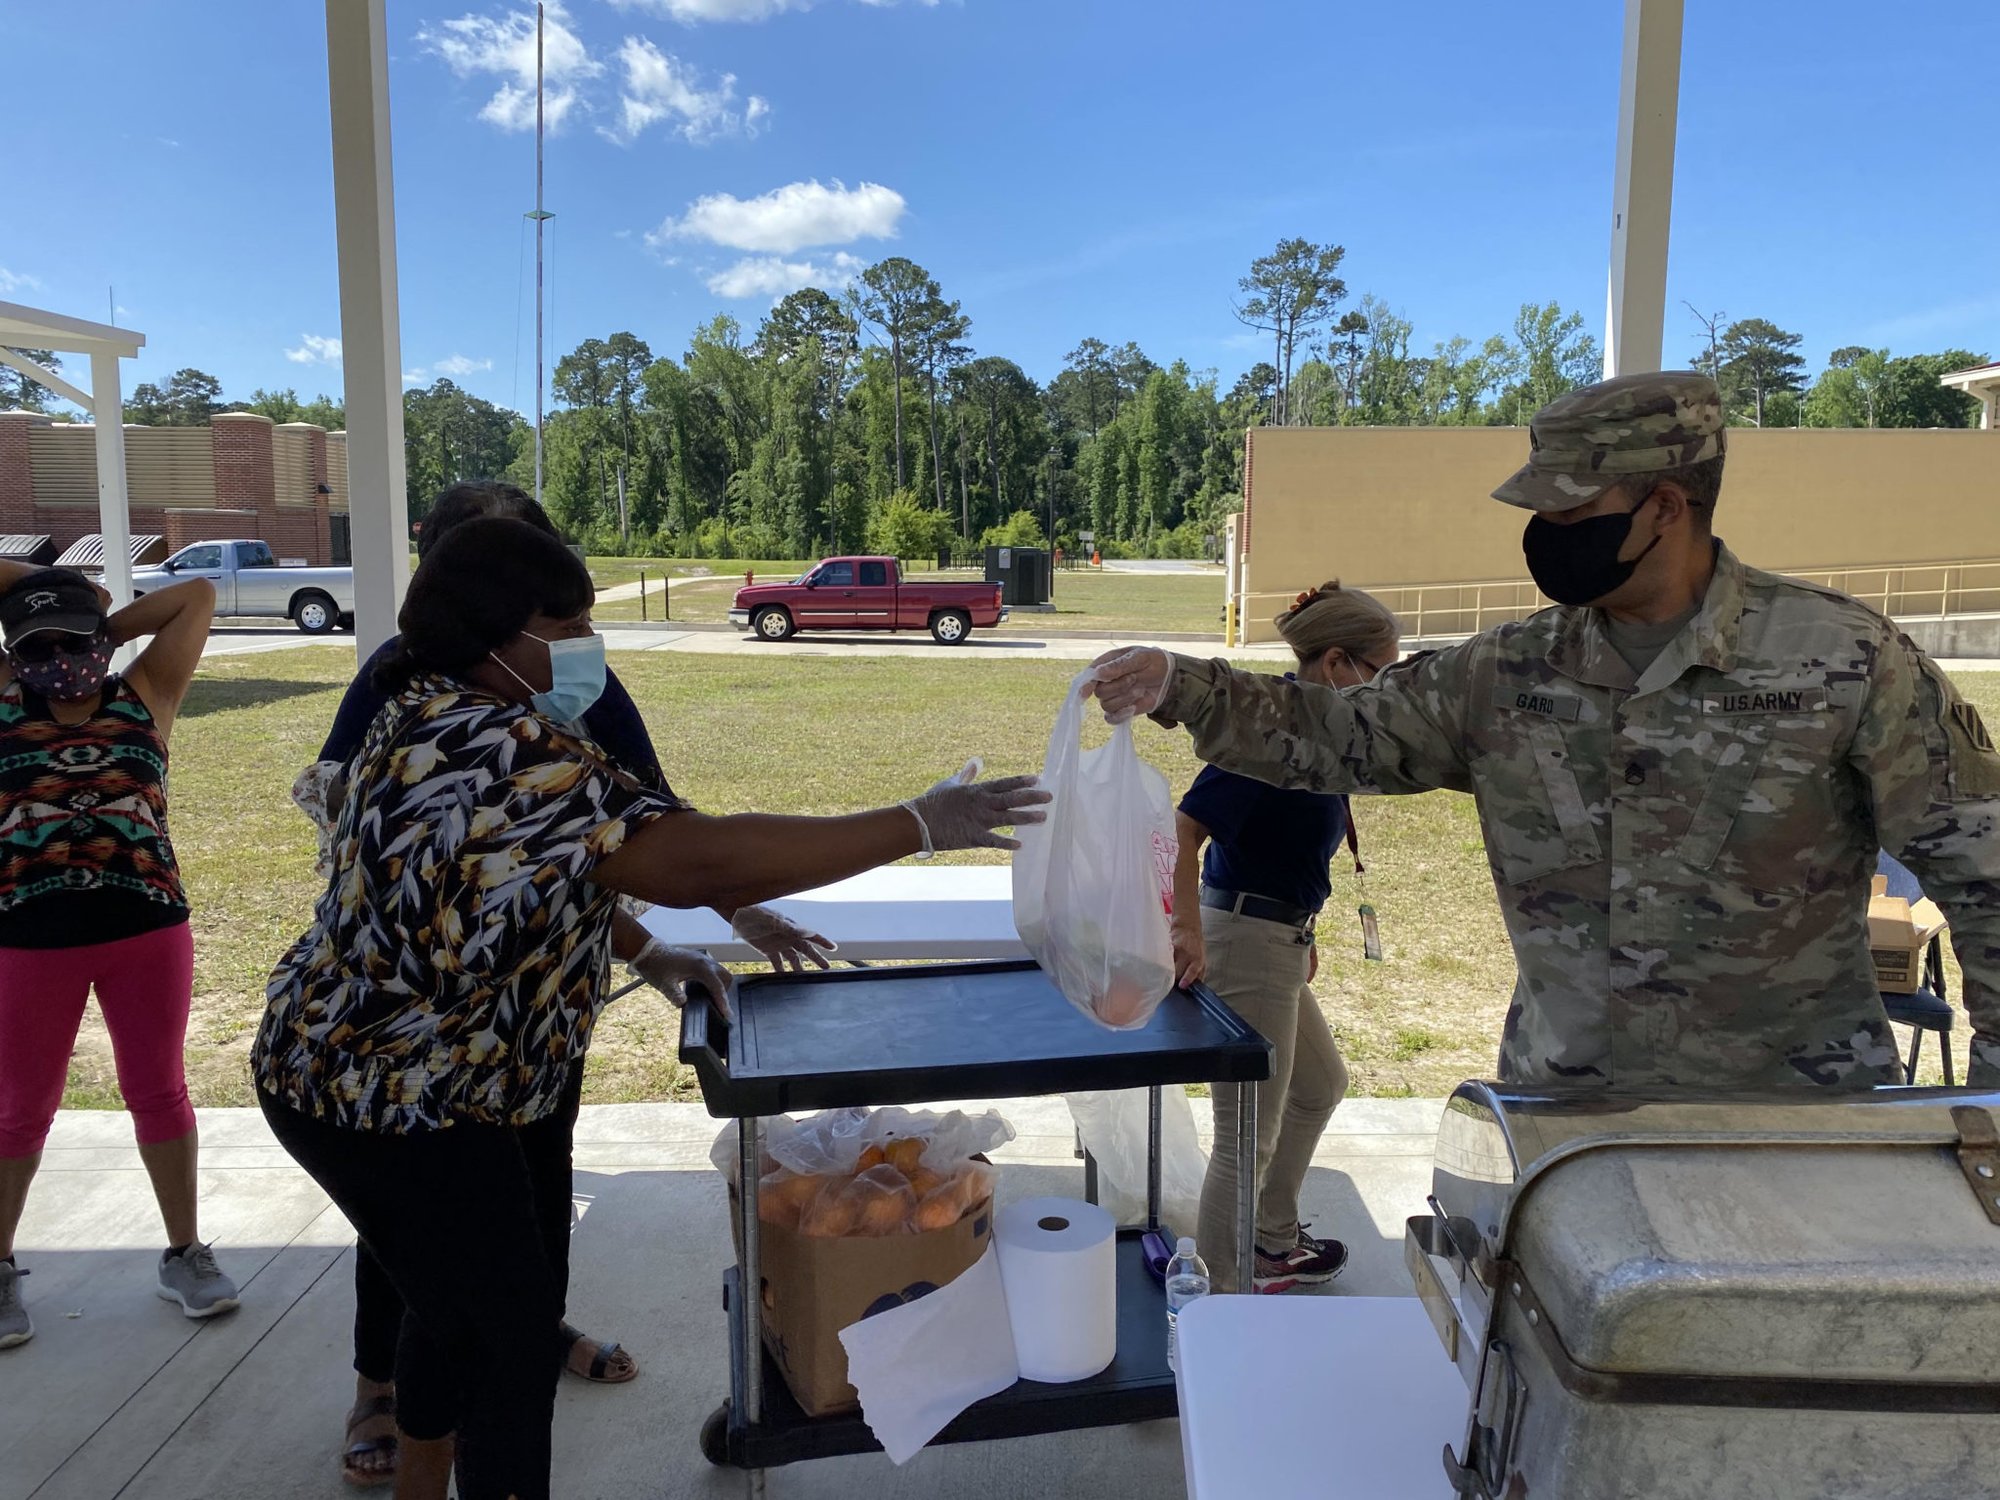 Staff Sgt. Josua Garo hands off a bagged lunch to a Diamond Elementary School food service staff member April 29 on Fort Stewart. Garo is a volunteer for the DoDEA Fort Stewart School Meal Program during the COVID-19 pandemic. He and nine other Soldiers are volunteering across post, helping to provide services to the community. Photo by Spc. Noelle Wiehe/Fort Stewart Public Affairs Office. coffee or die